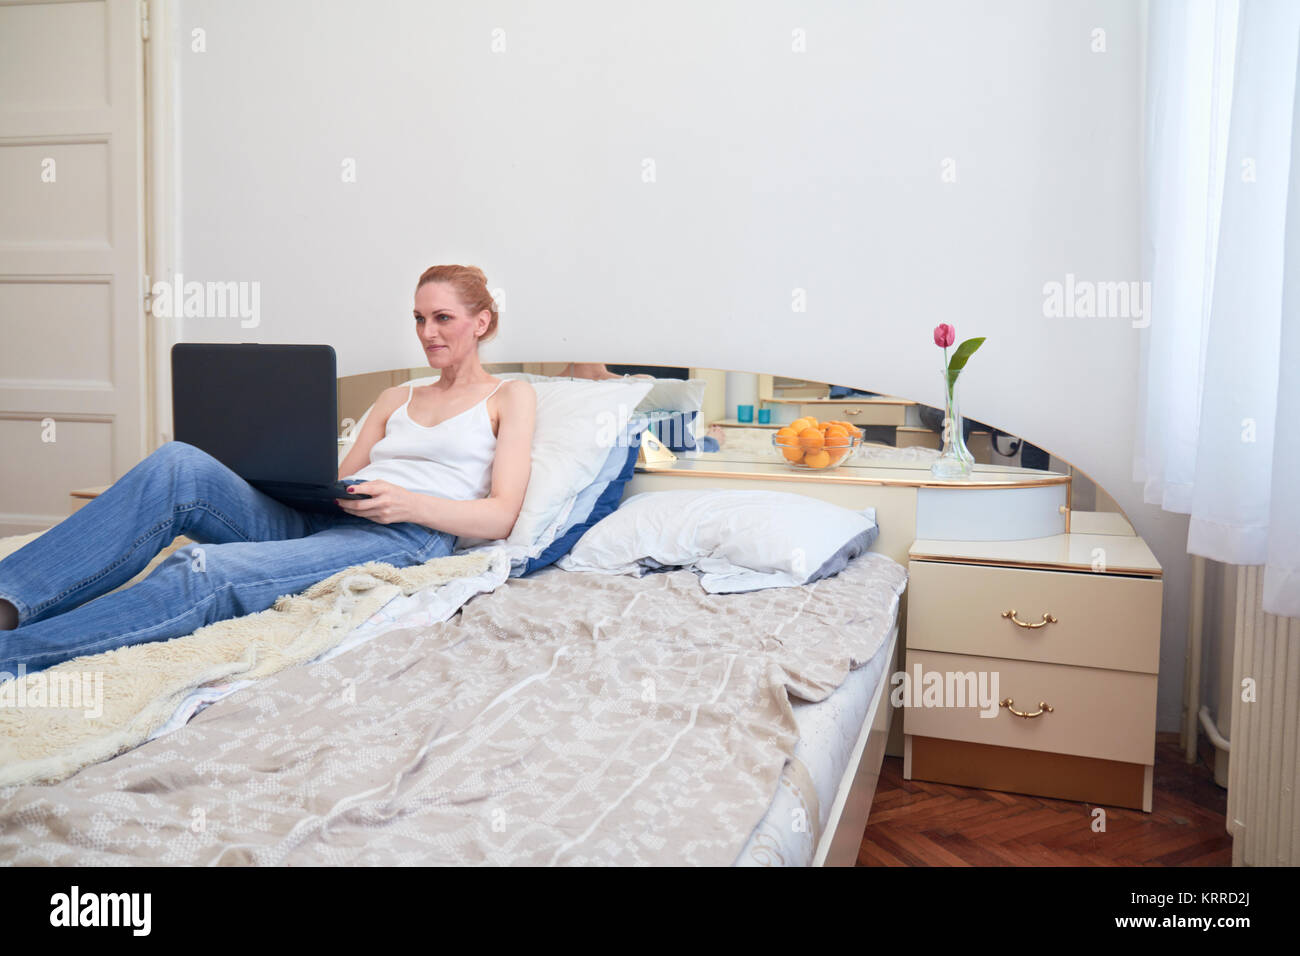 one woman, laying in bed smirking, using laptop. ordinary white room interior. Stock Photo